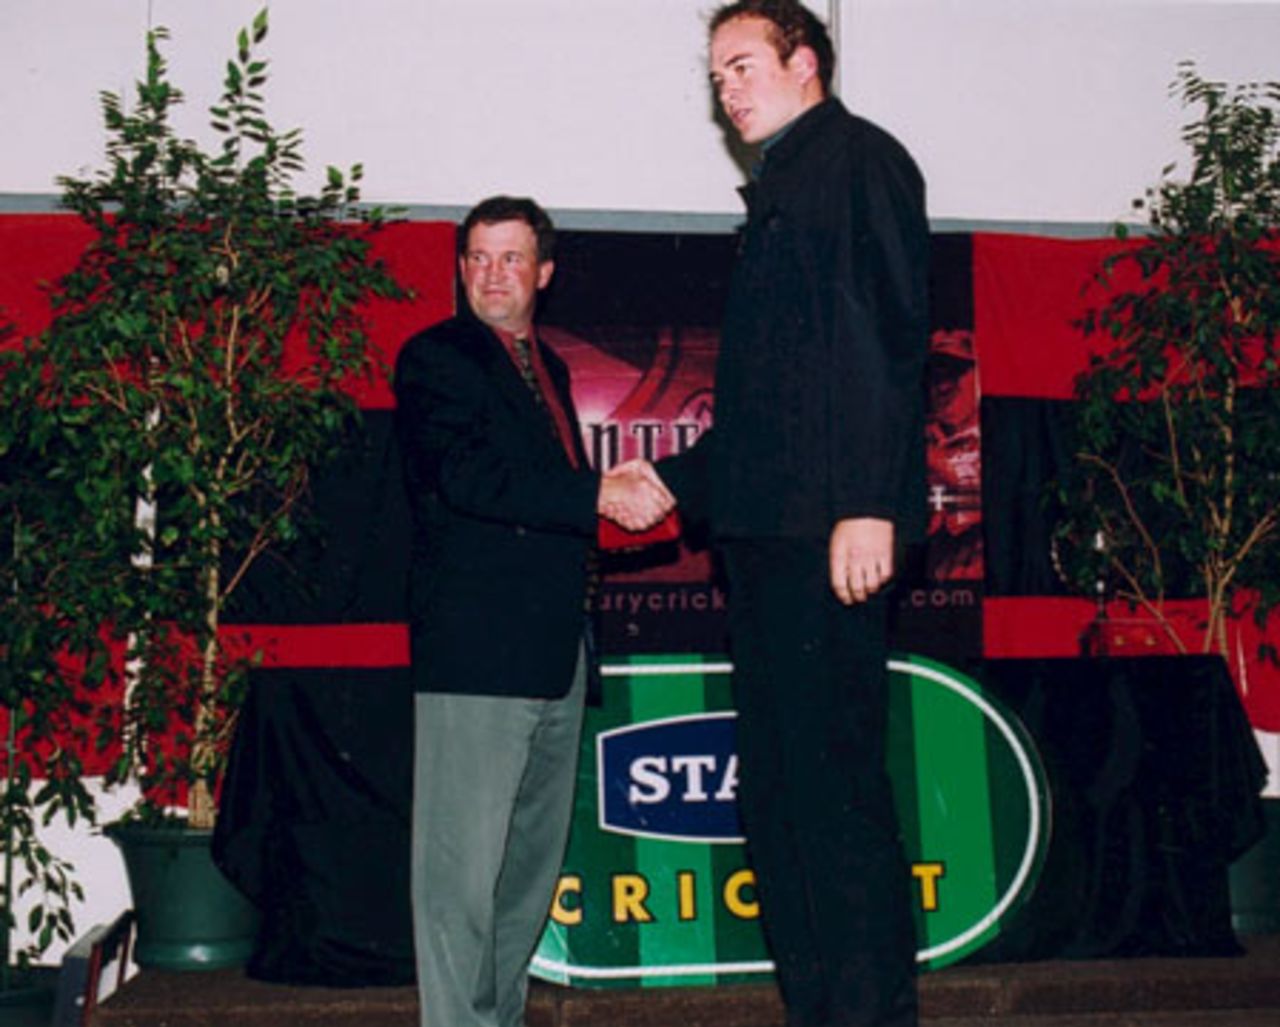 Peter Fulton (right) receives the Canterbury Draught State Canterbury Wizard Batsman of the Year award from David Barley of Canterbury Draught. Canterbury Cricket Association Awards 2002/03 at the Canterbury Horticultural Society Hall at Christchurch, 10 April 2003.